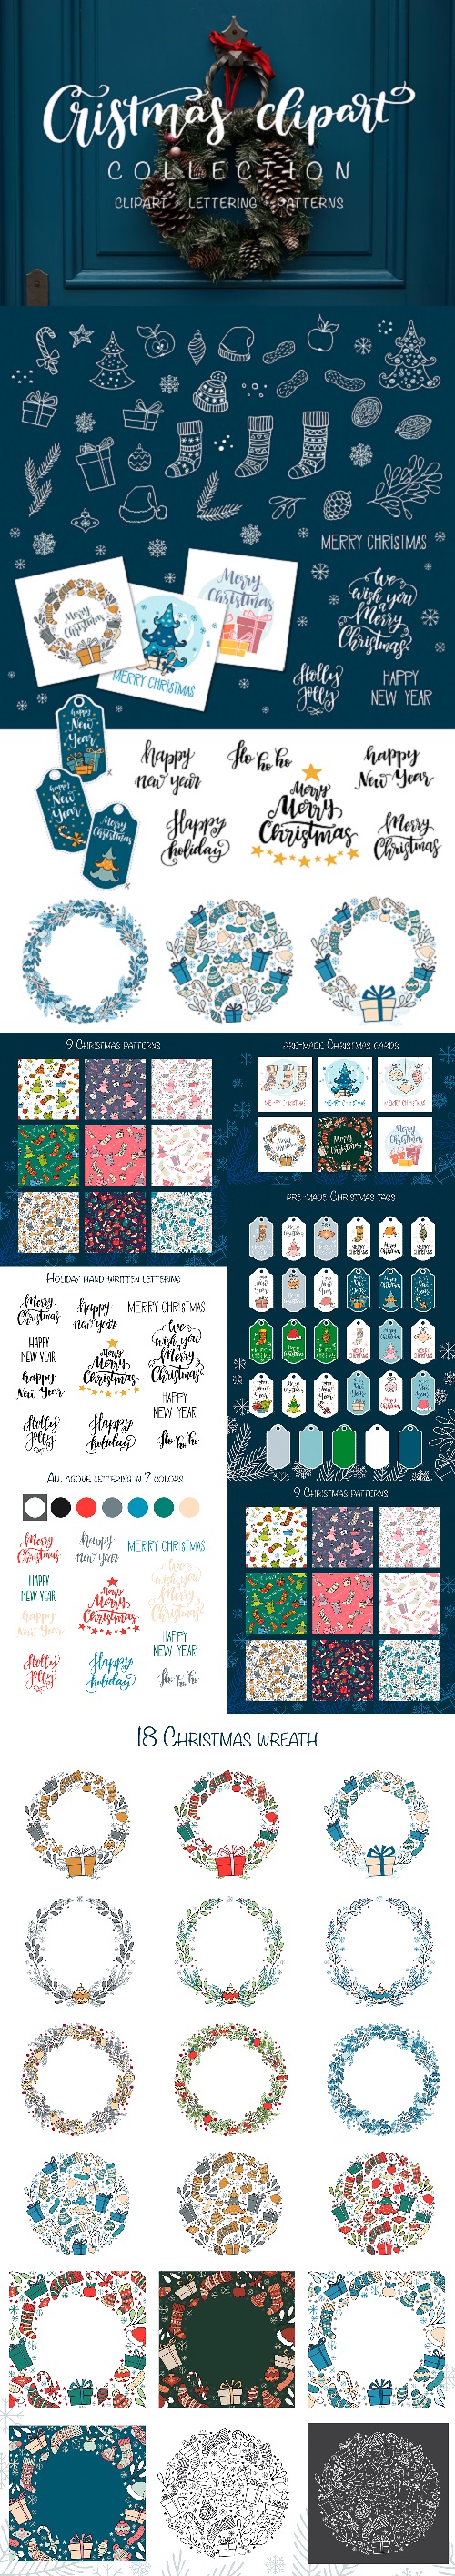 Christmas clipart collection 2119598